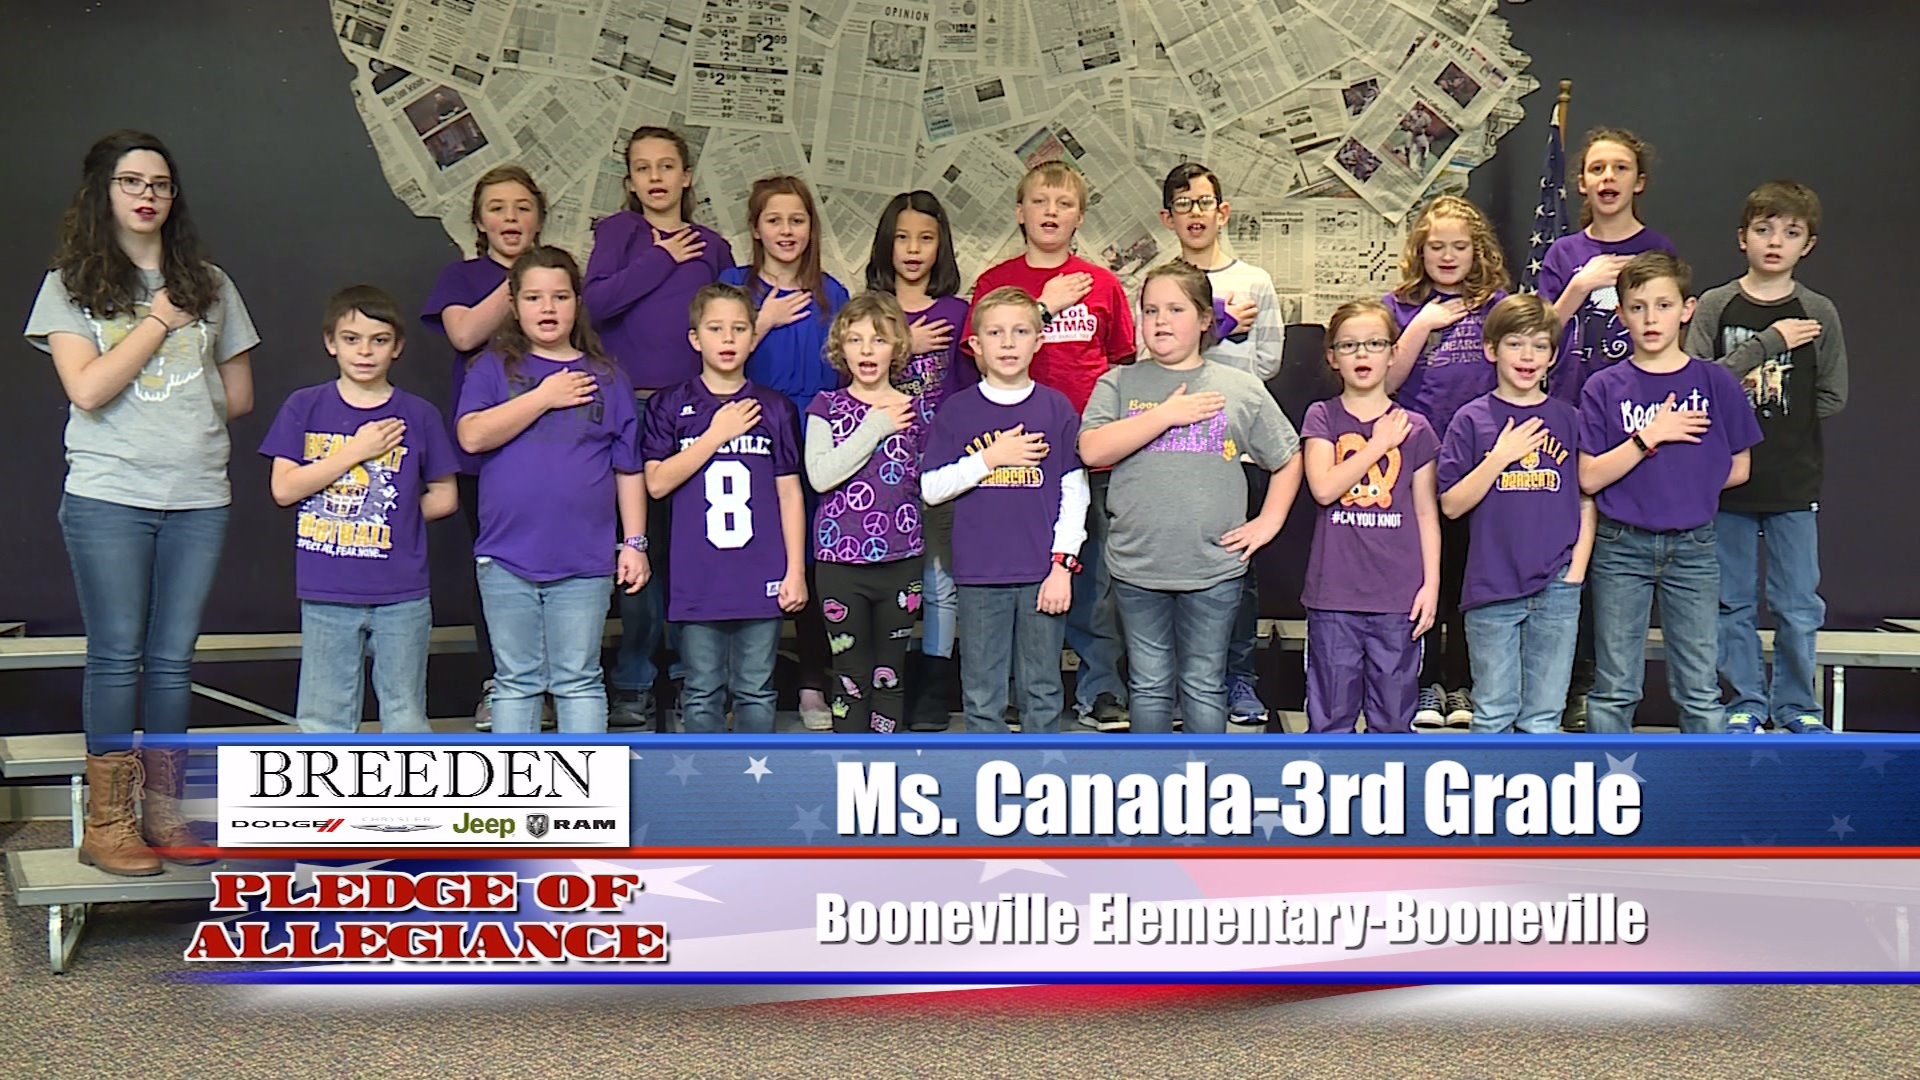 Ms. Canada  3rd Grade  Booneville Elementary  Booneville